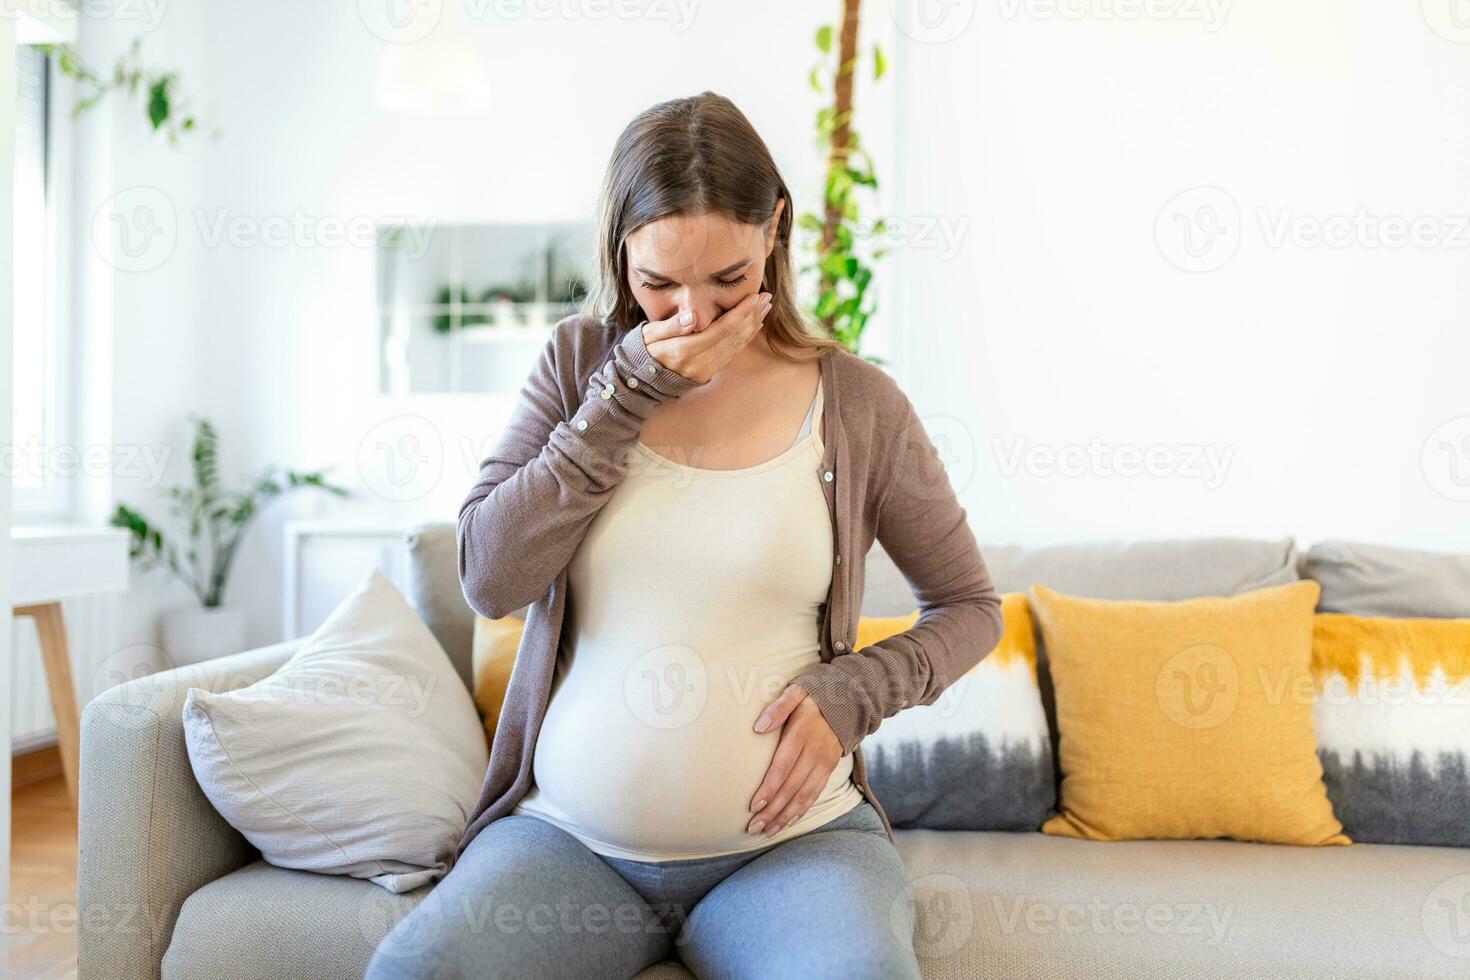 young pregnant woman suffering from toxicosis at home. maternity lady having morning sickness covering mouth with hands while sitting on couch in living room. mom expect unborn baby photo